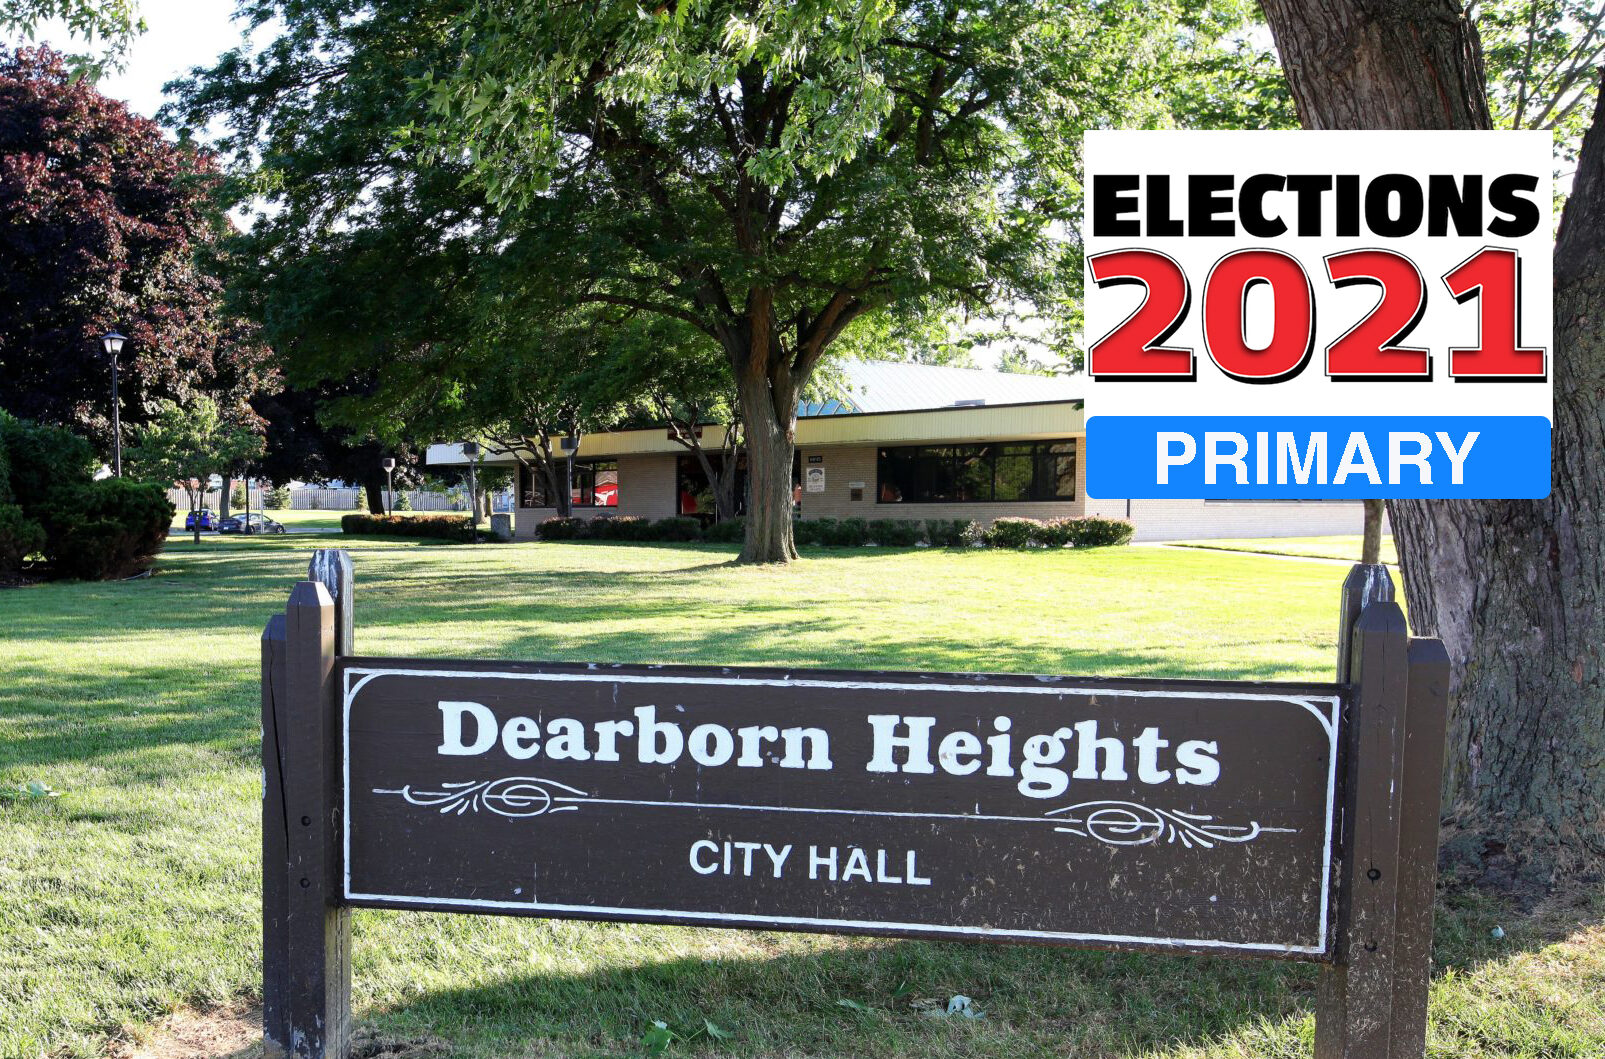 Dearborn Heights: The mayoral race is the only one on the Aug 3 ballot